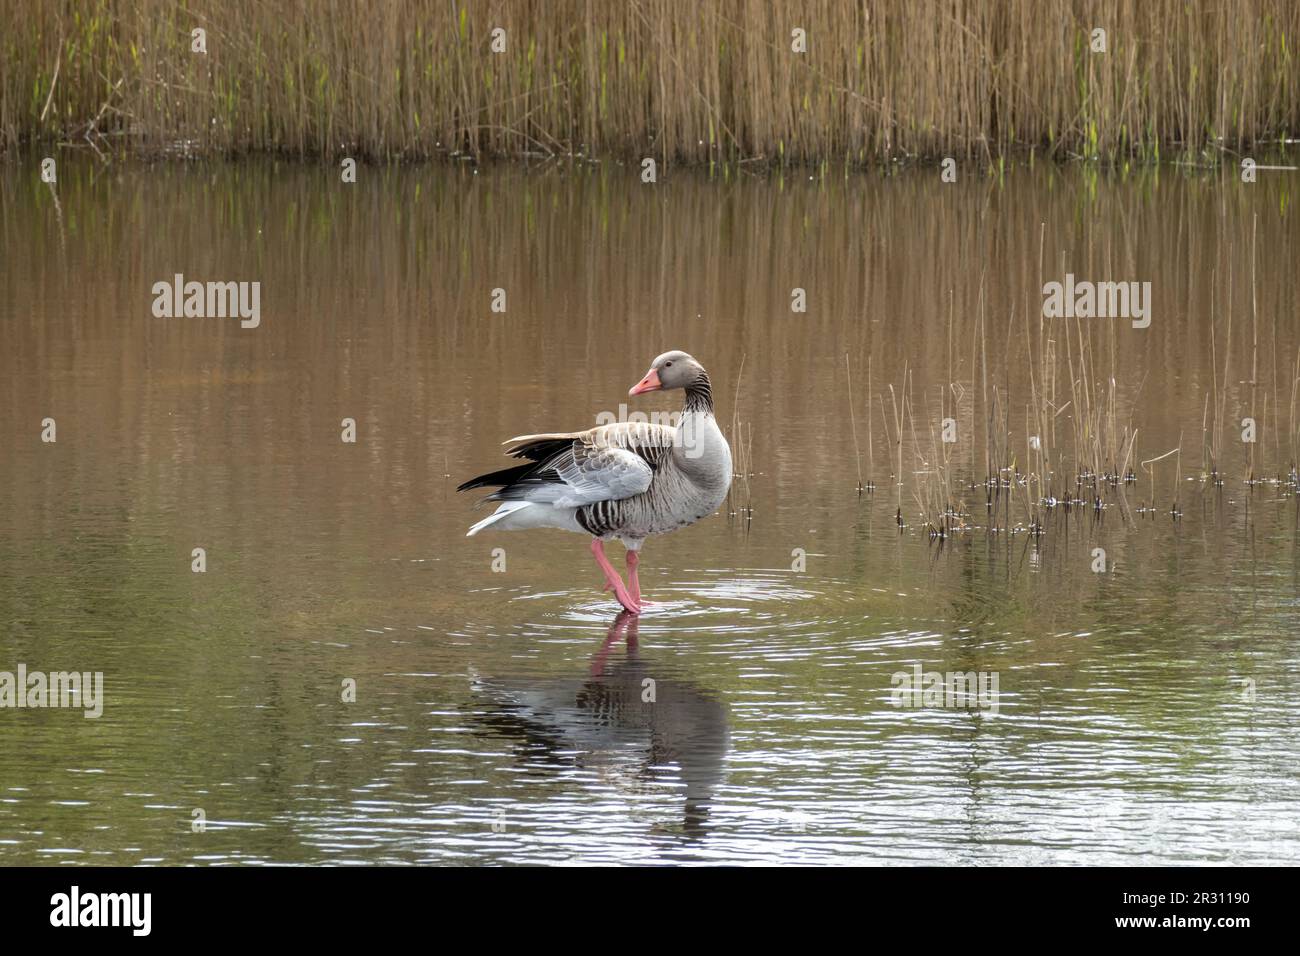 Greylag goose, Anser anser, standing on one leg in shallow water of pond in nature reserve Zanderij Crailo, Hilversum, Netherlands Stock Photo